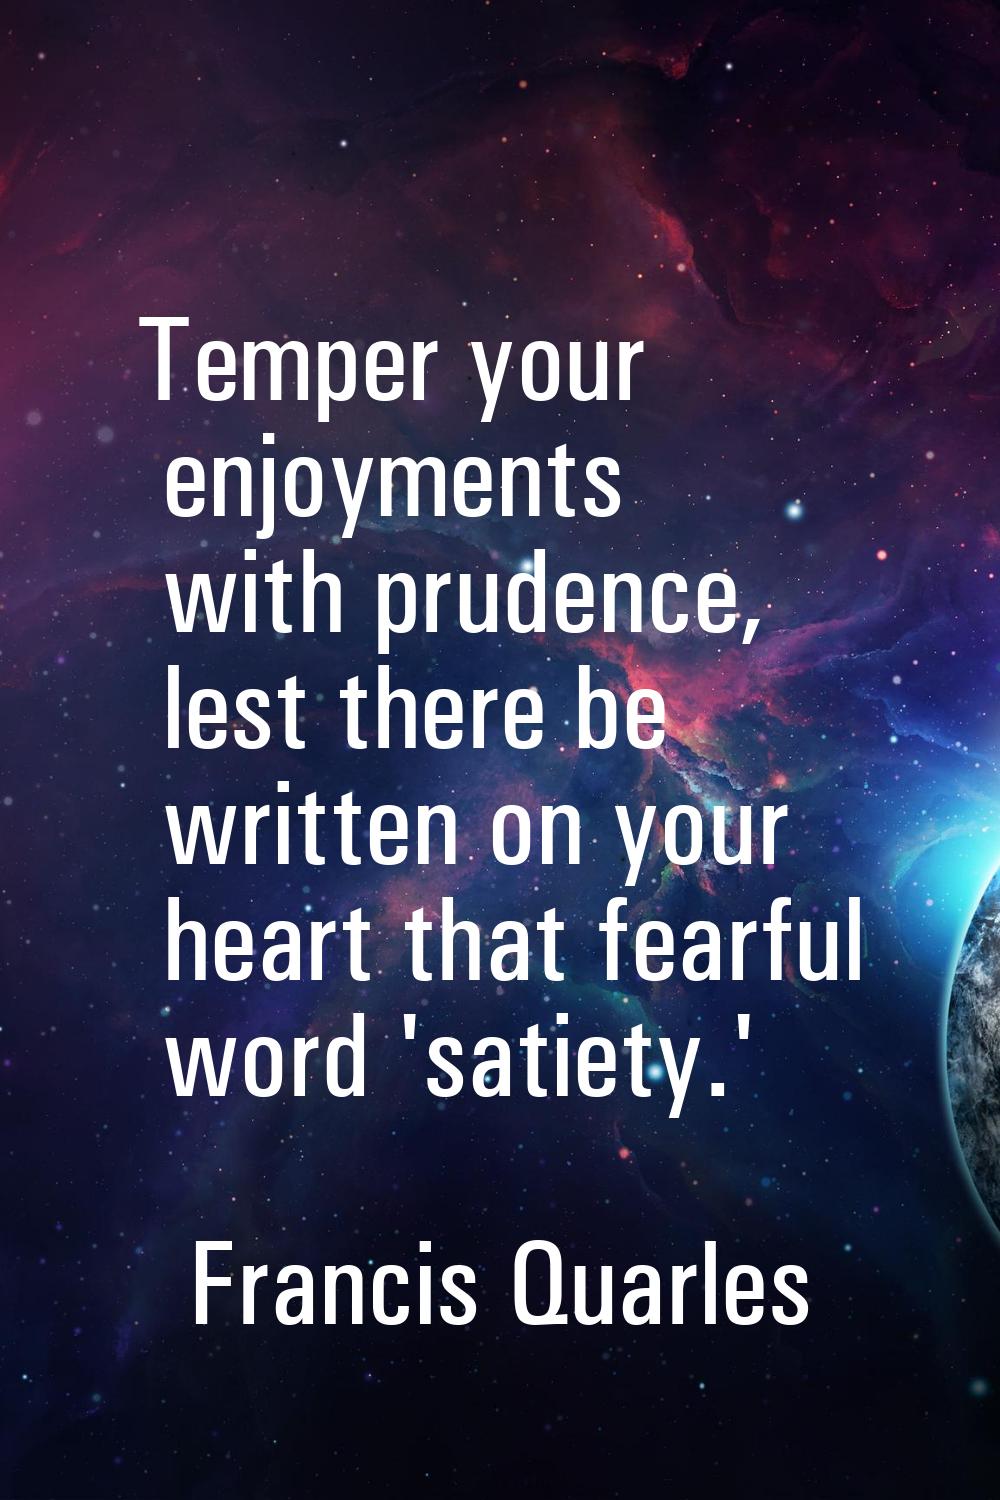 Temper your enjoyments with prudence, lest there be written on your heart that fearful word 'satiet